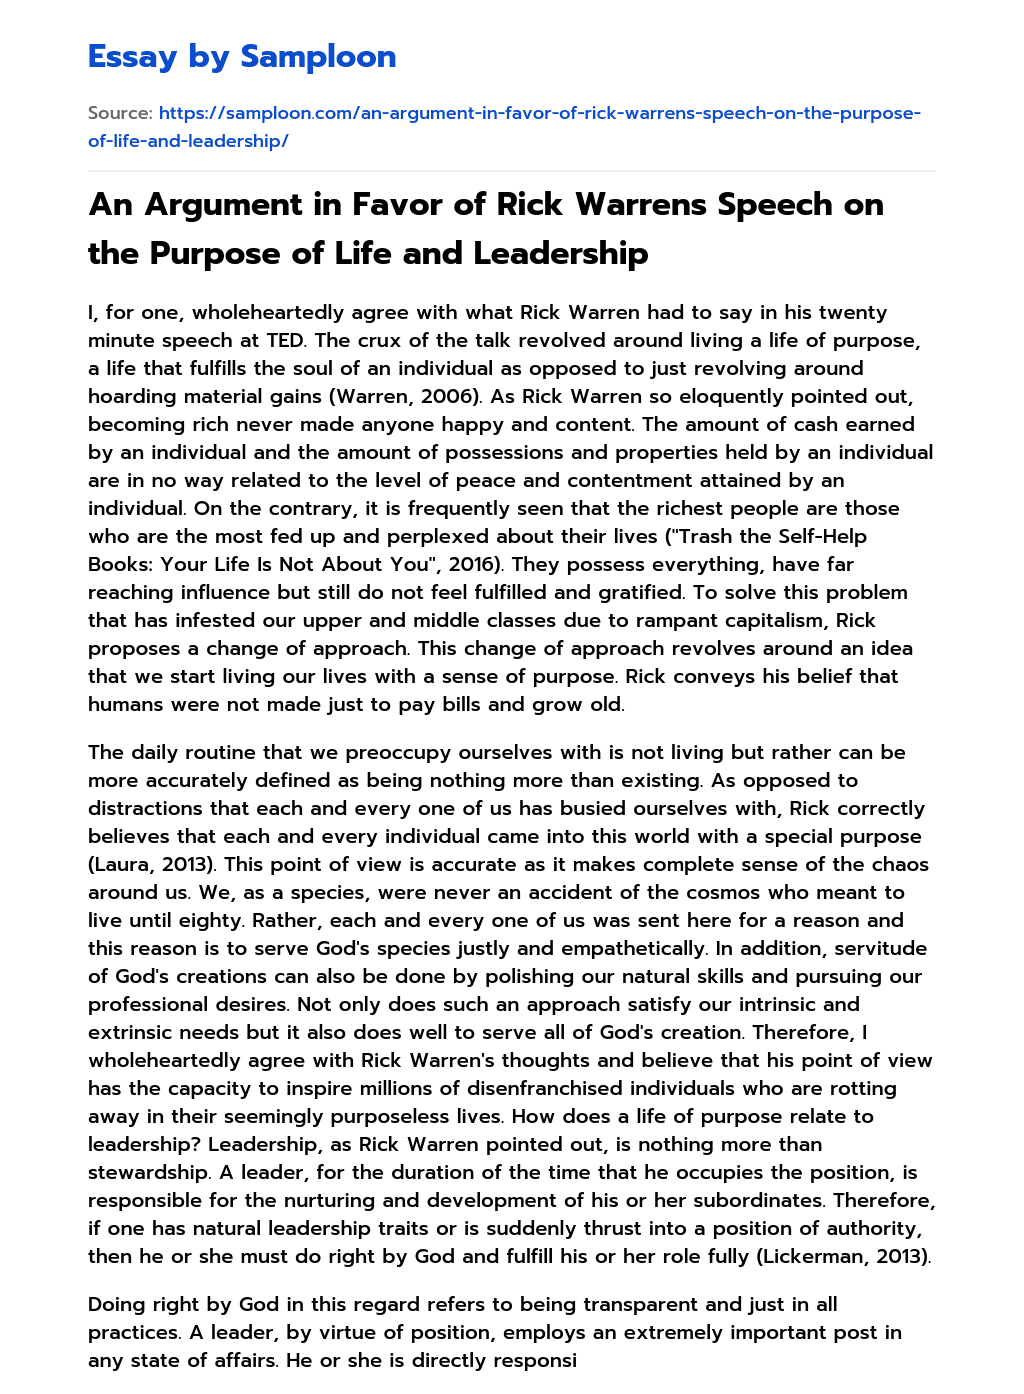 An Argument in Favor of Rick Warrens Speech on the Purpose of Life and Leadership essay